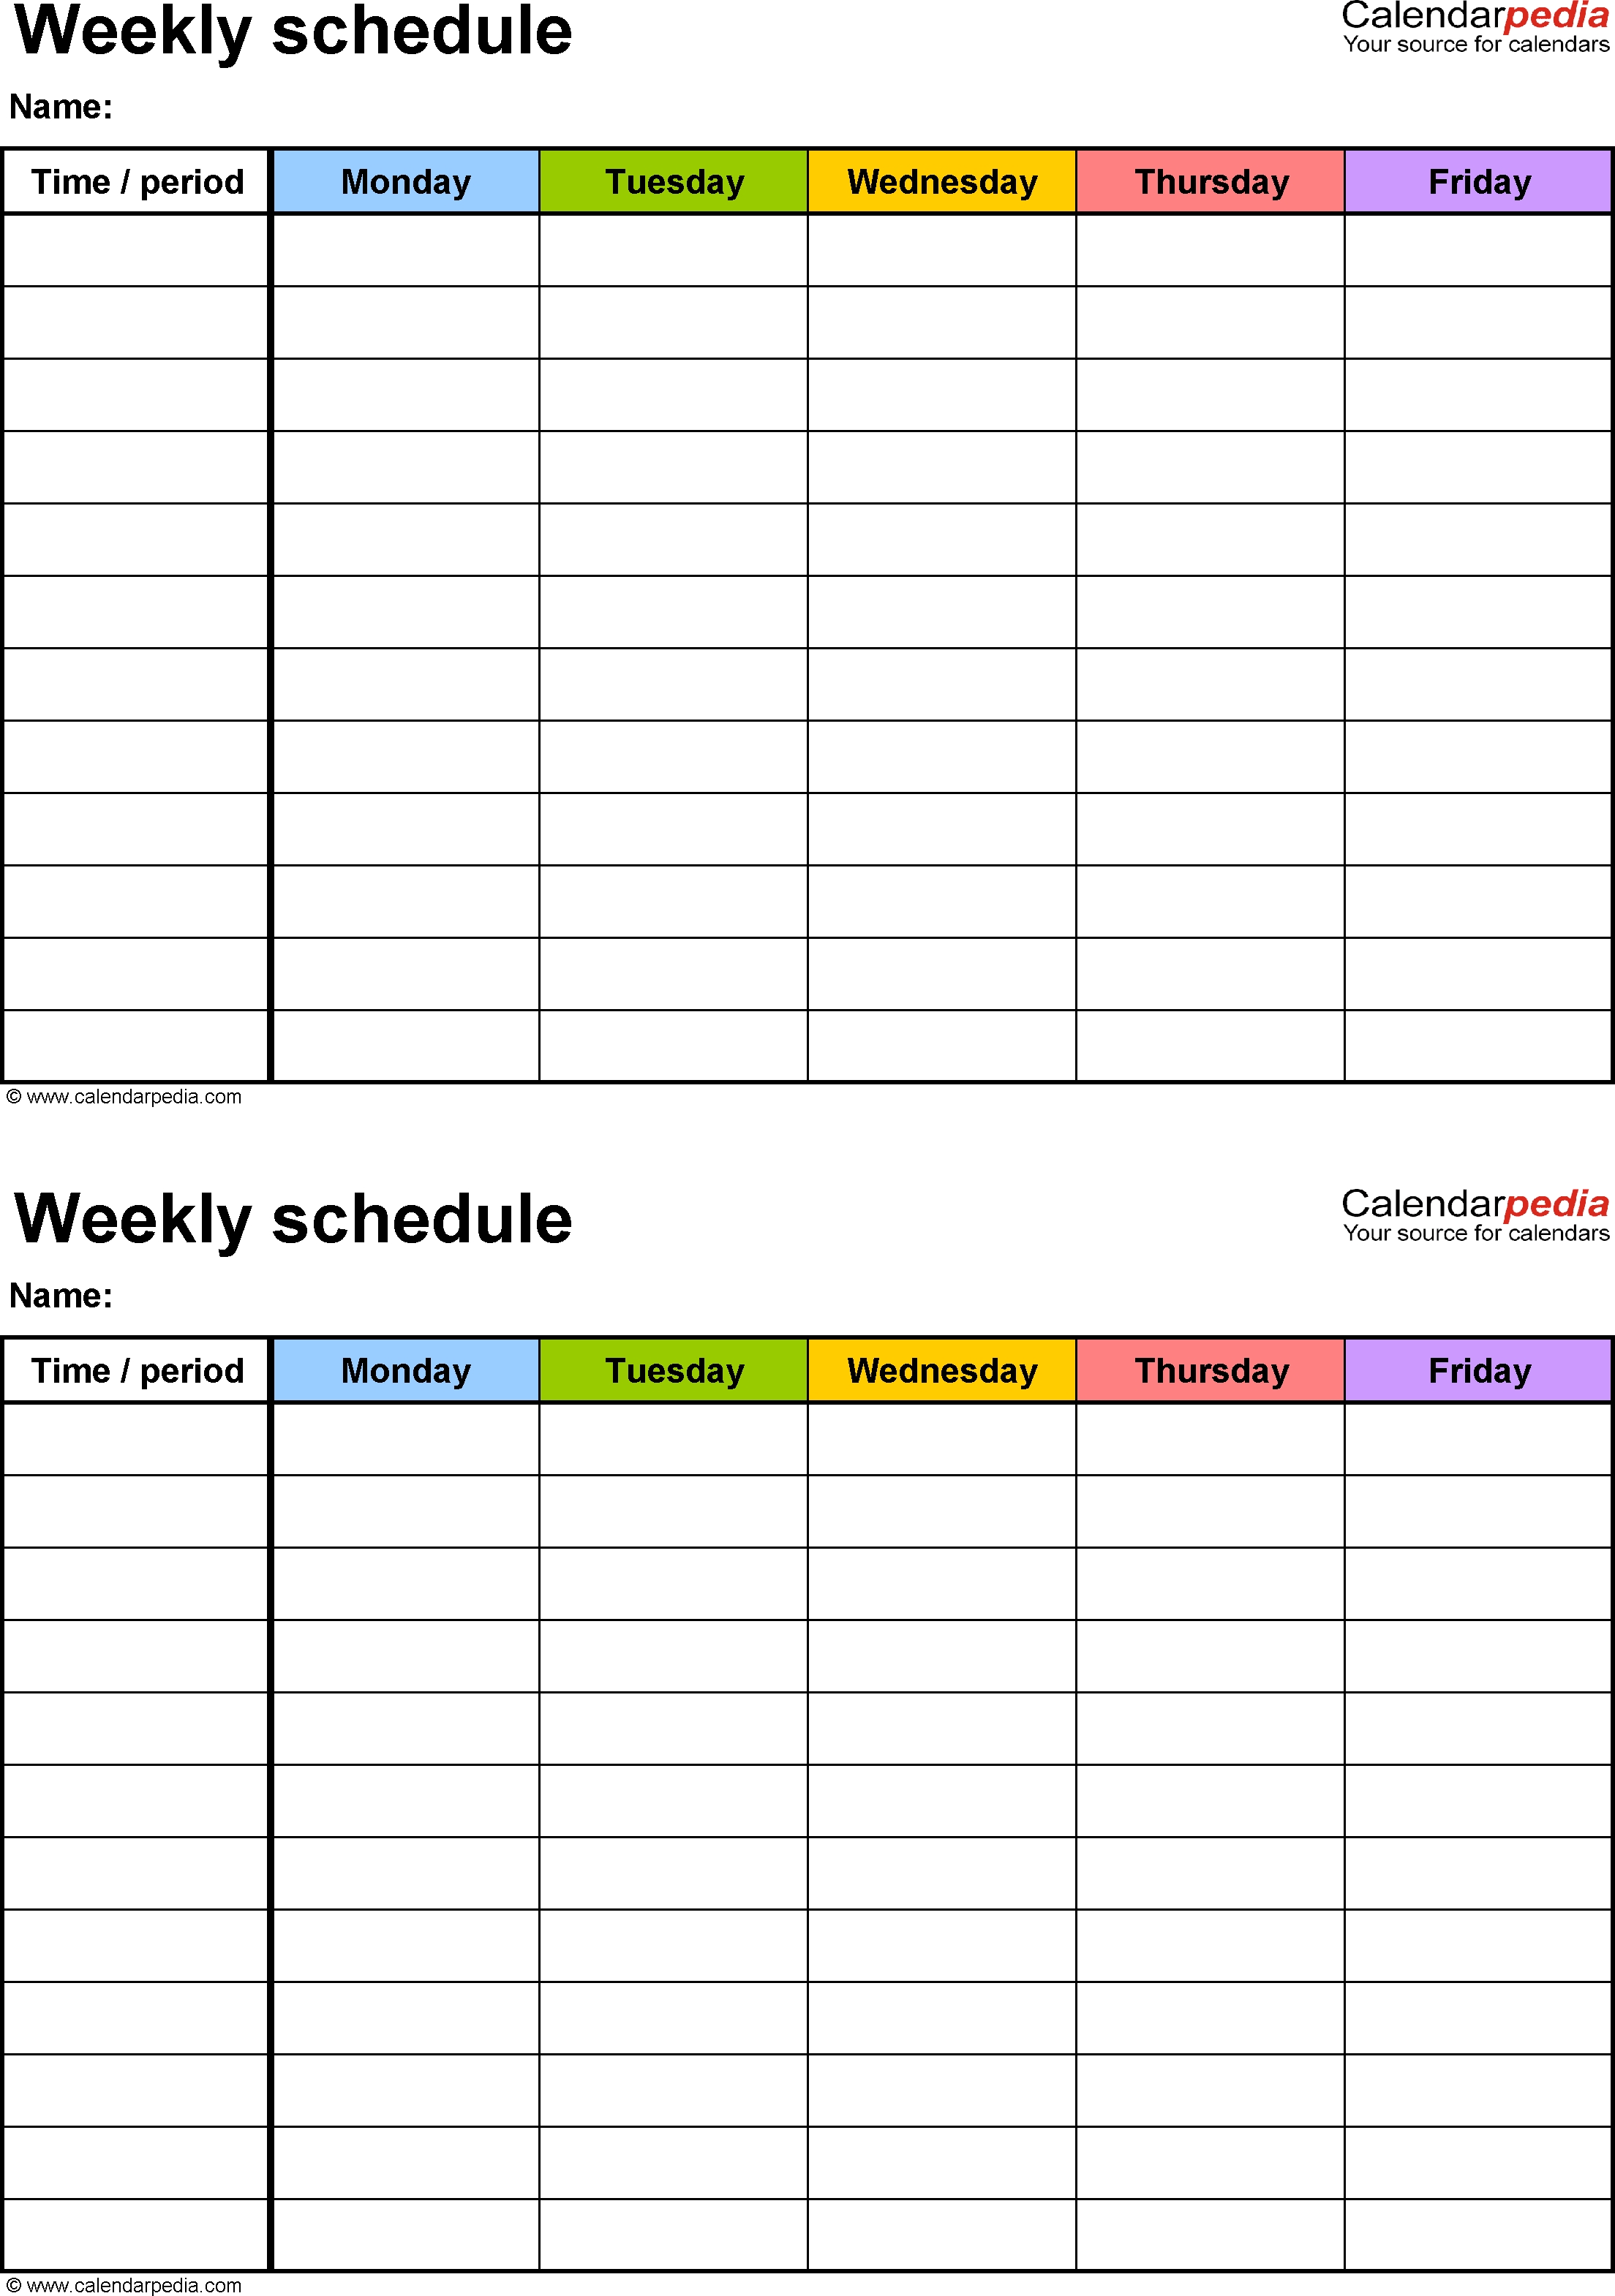 Free Weekly Schedule Templates For Excel - 18 Templates with regard to Online Daily Time Slot Planner